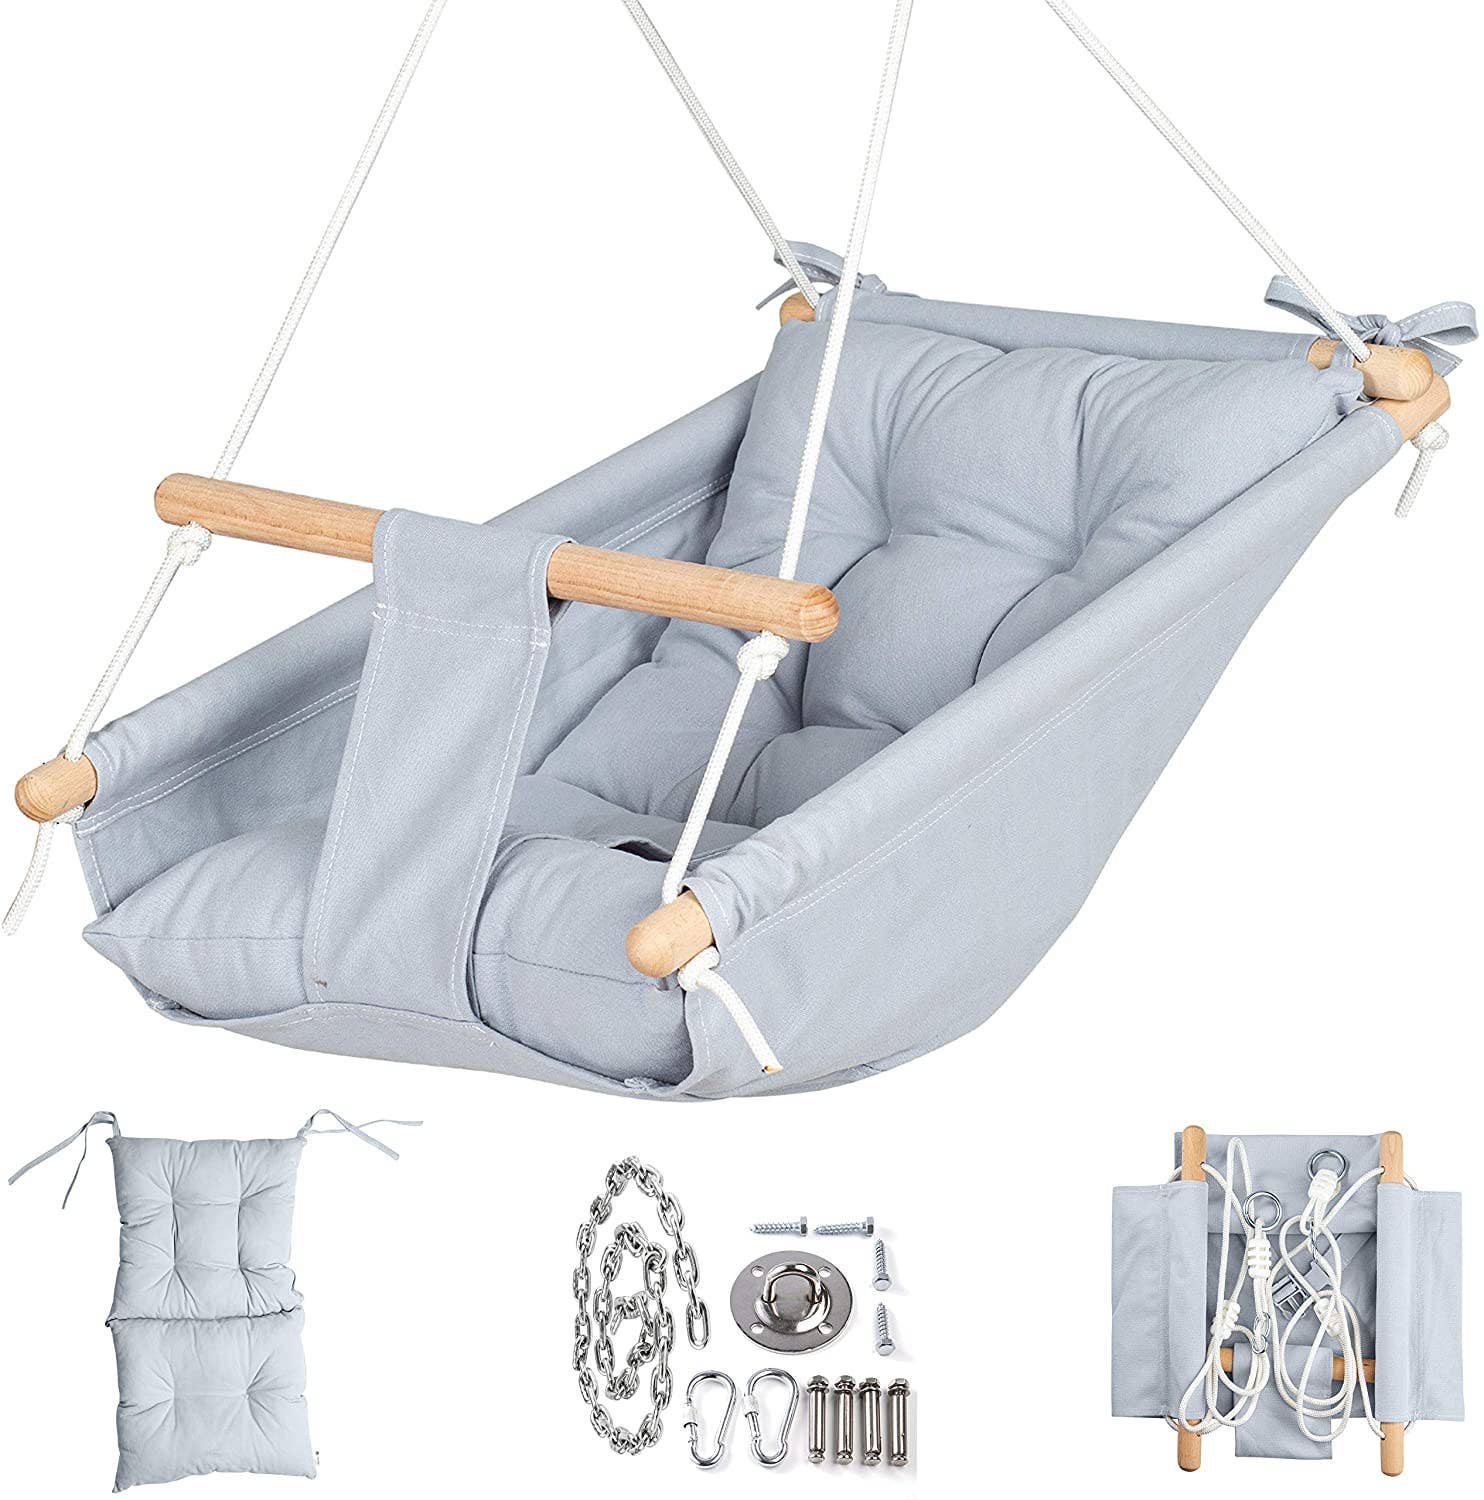 A display of the Canvas Baby Hammock Swing, the pillow, and the hanging hardware.